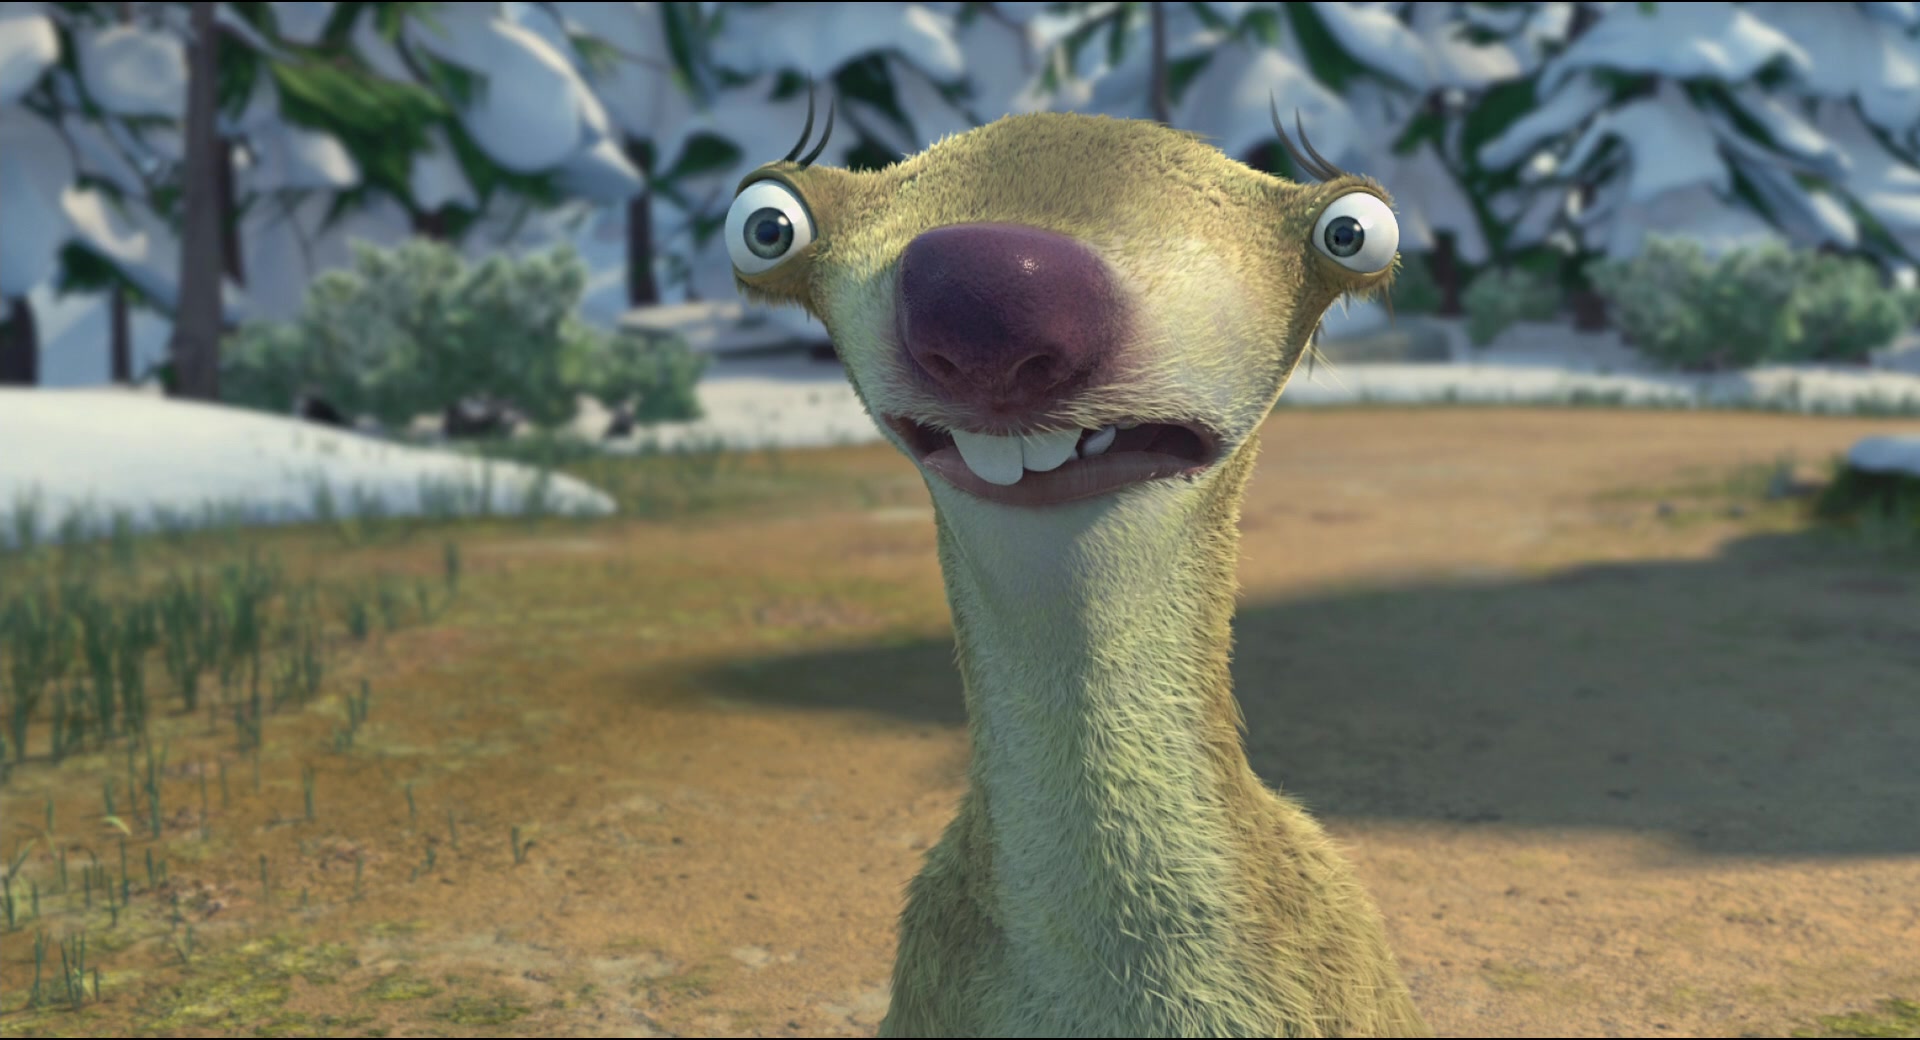 Ice Age: Dawn of the Dinosaurs Images. 